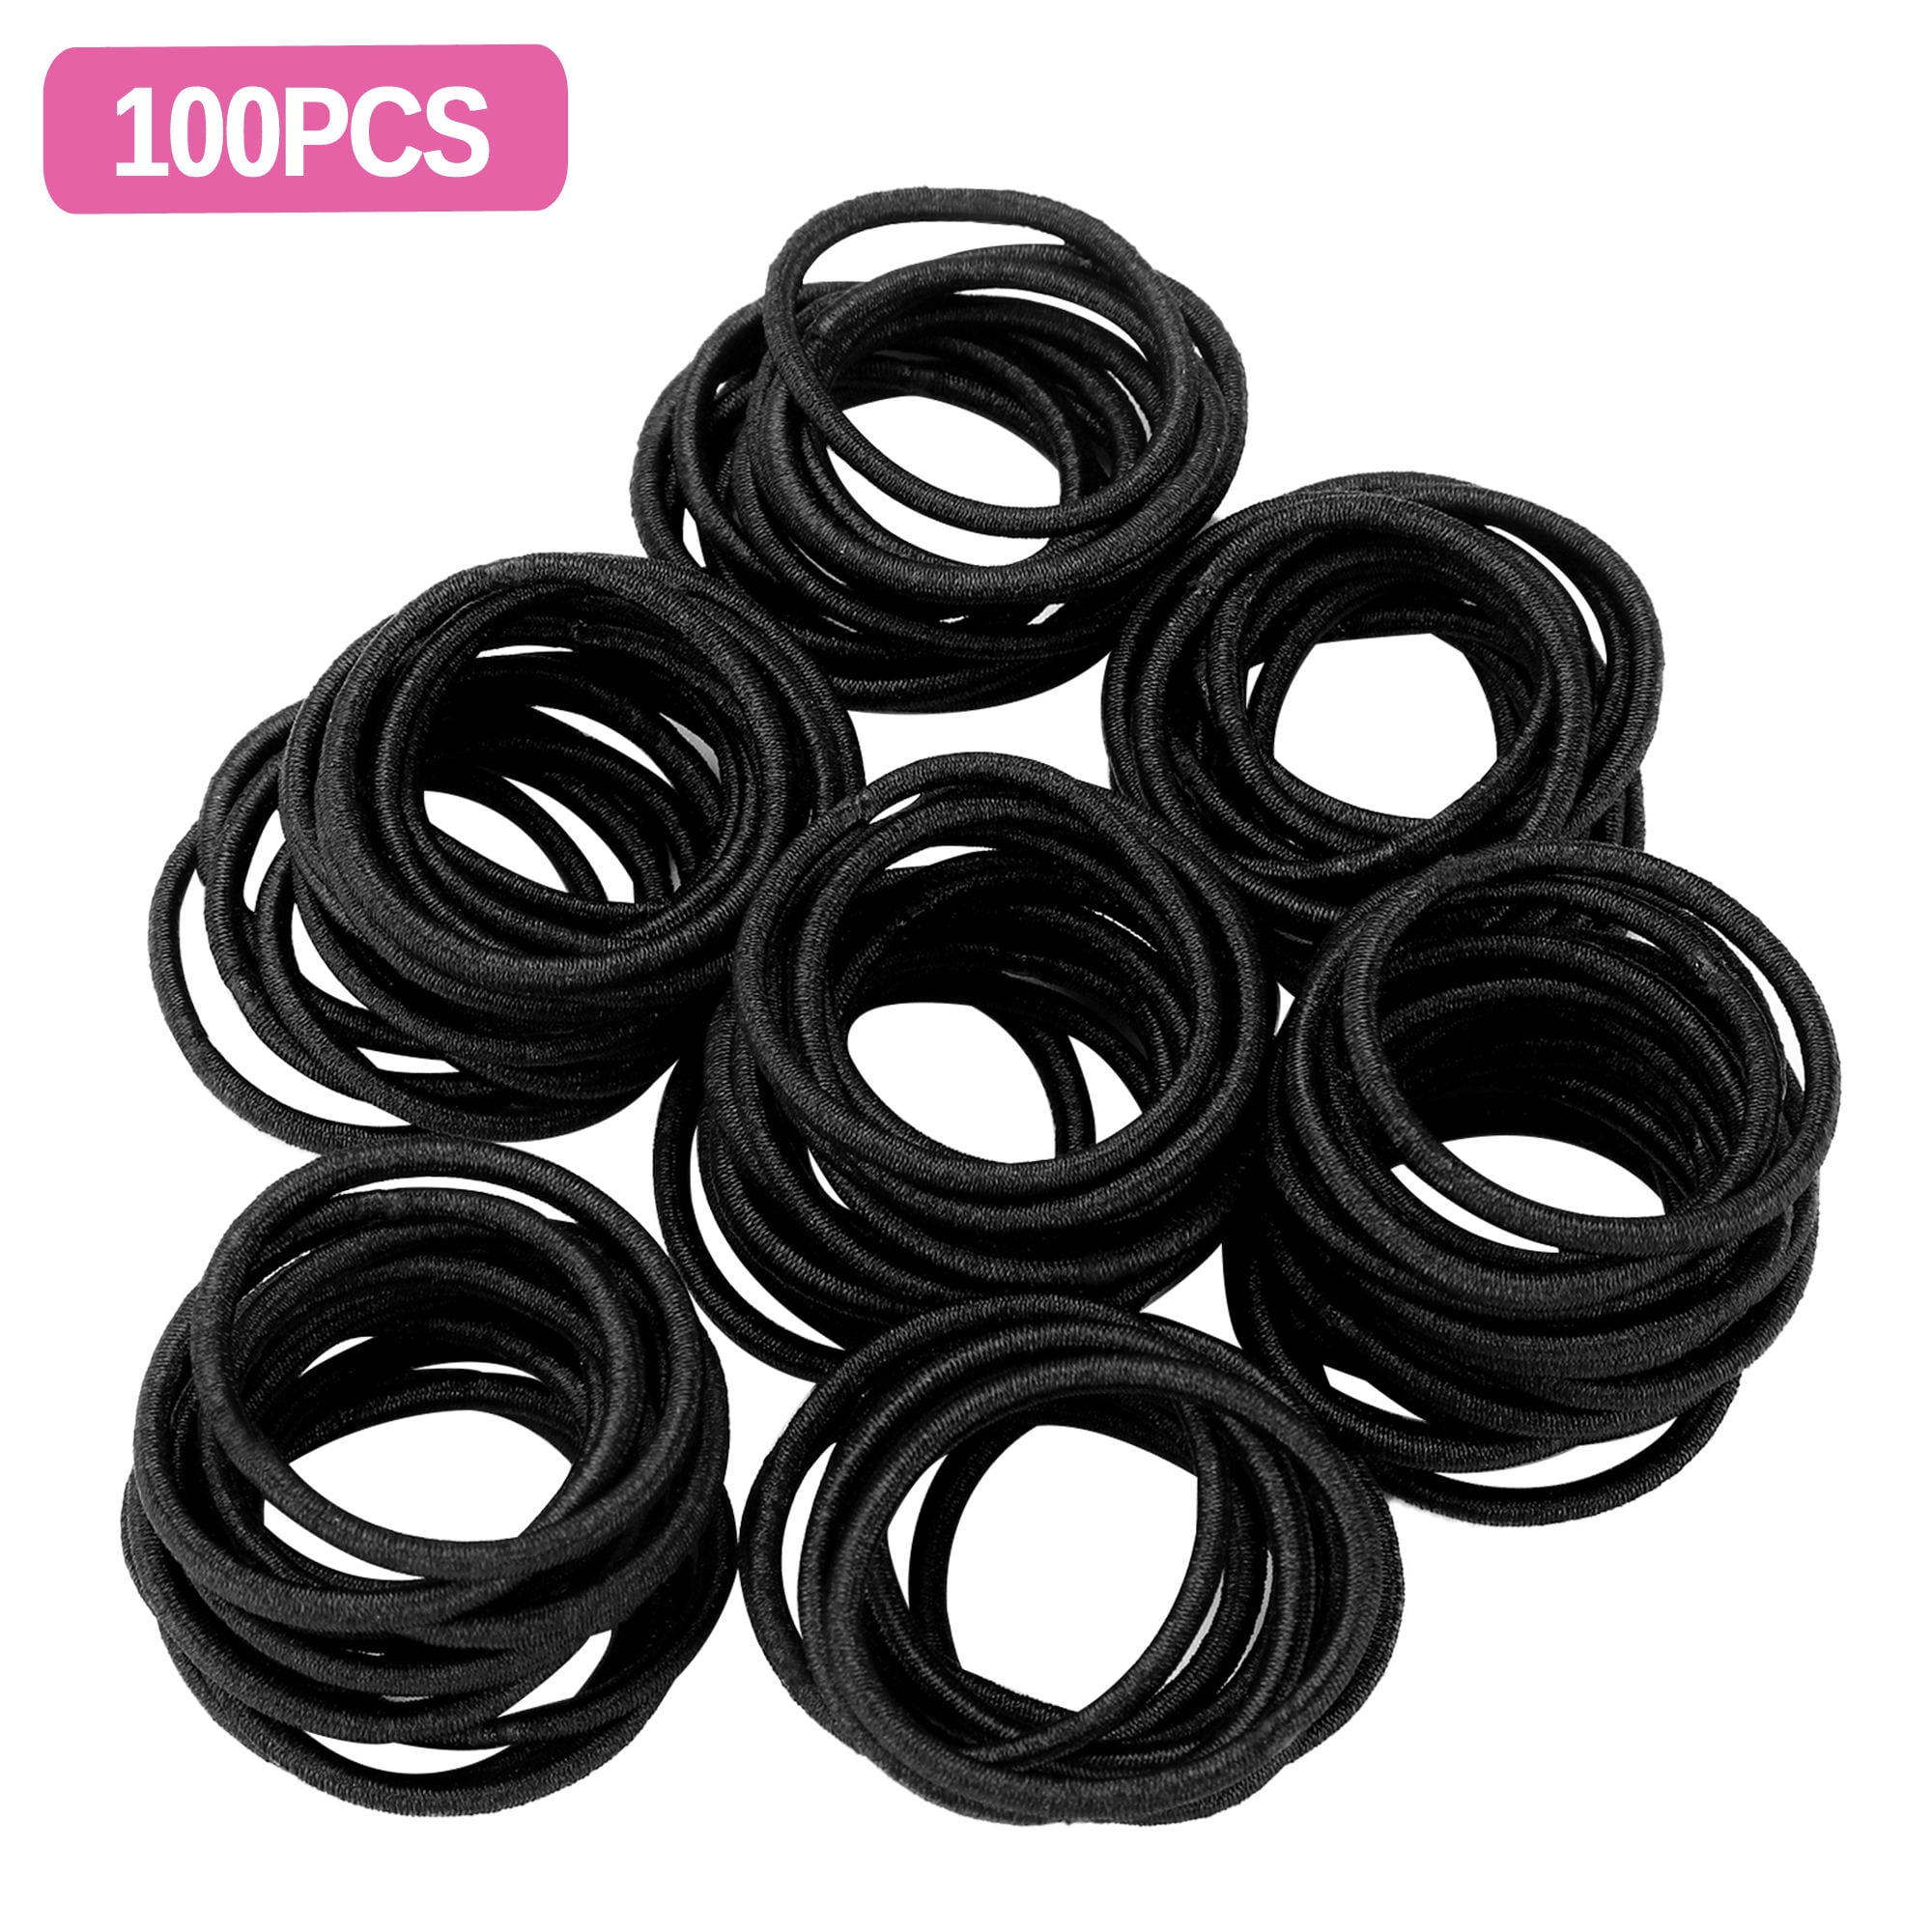 Juome 1011Pcs Hair Styling Tools, 2Pcs Rubber Band Cutter for Hair, 2Pcs  Topsy Tail Hair Tool, 1000pcs Black Rubber Bands for Hair, 7Pcs Hair  Braiding